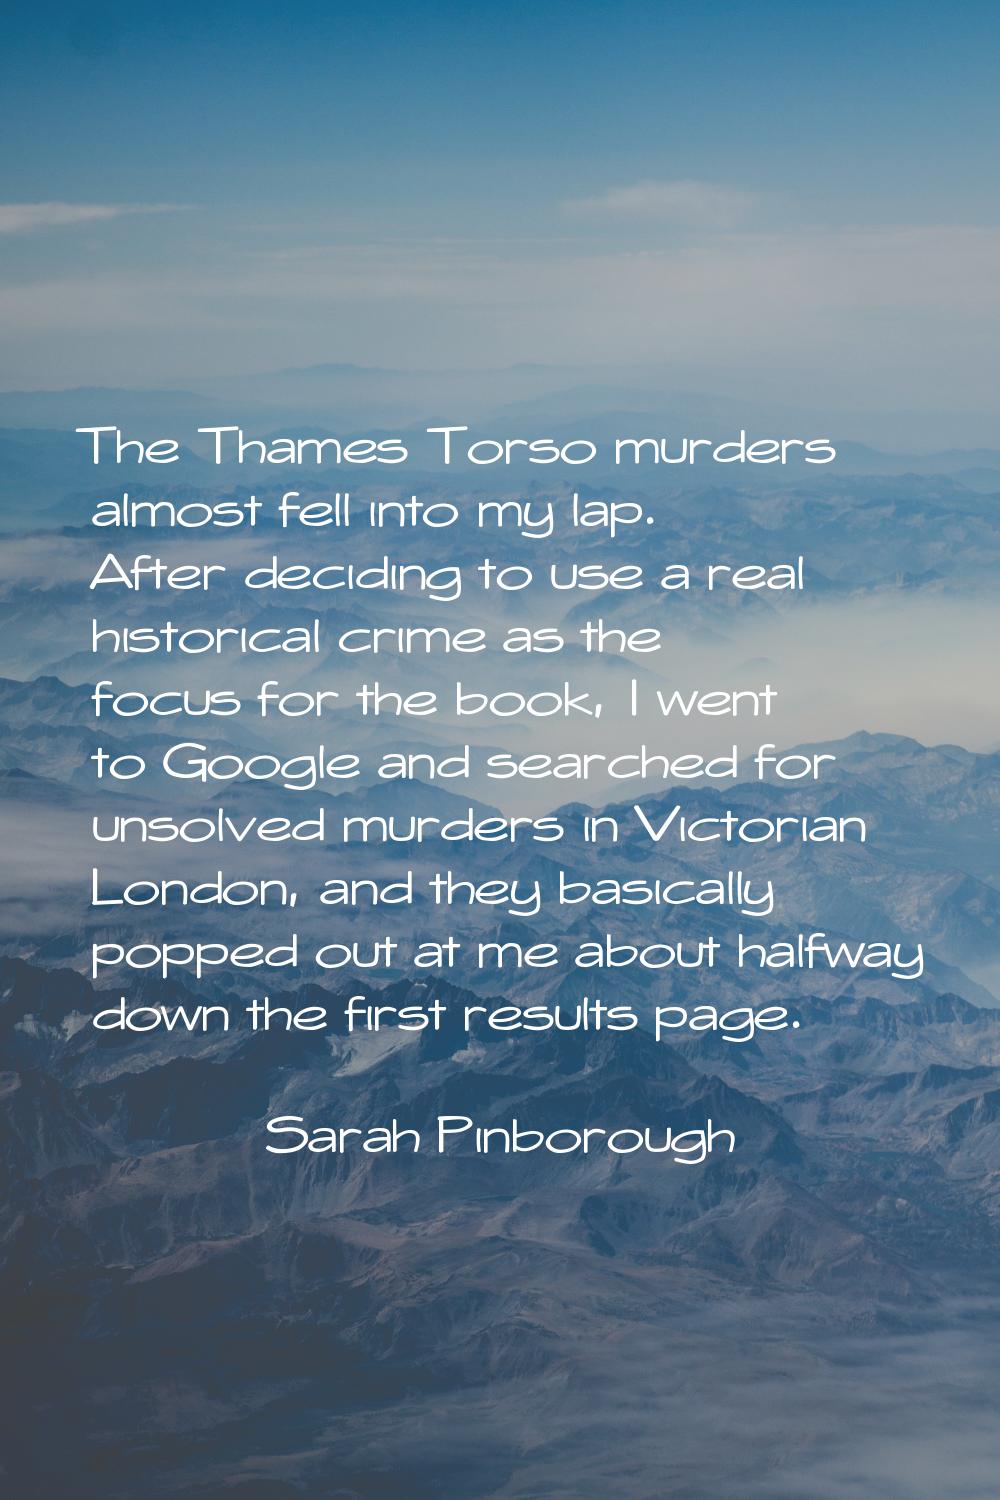 The Thames Torso murders almost fell into my lap. After deciding to use a real historical crime as 